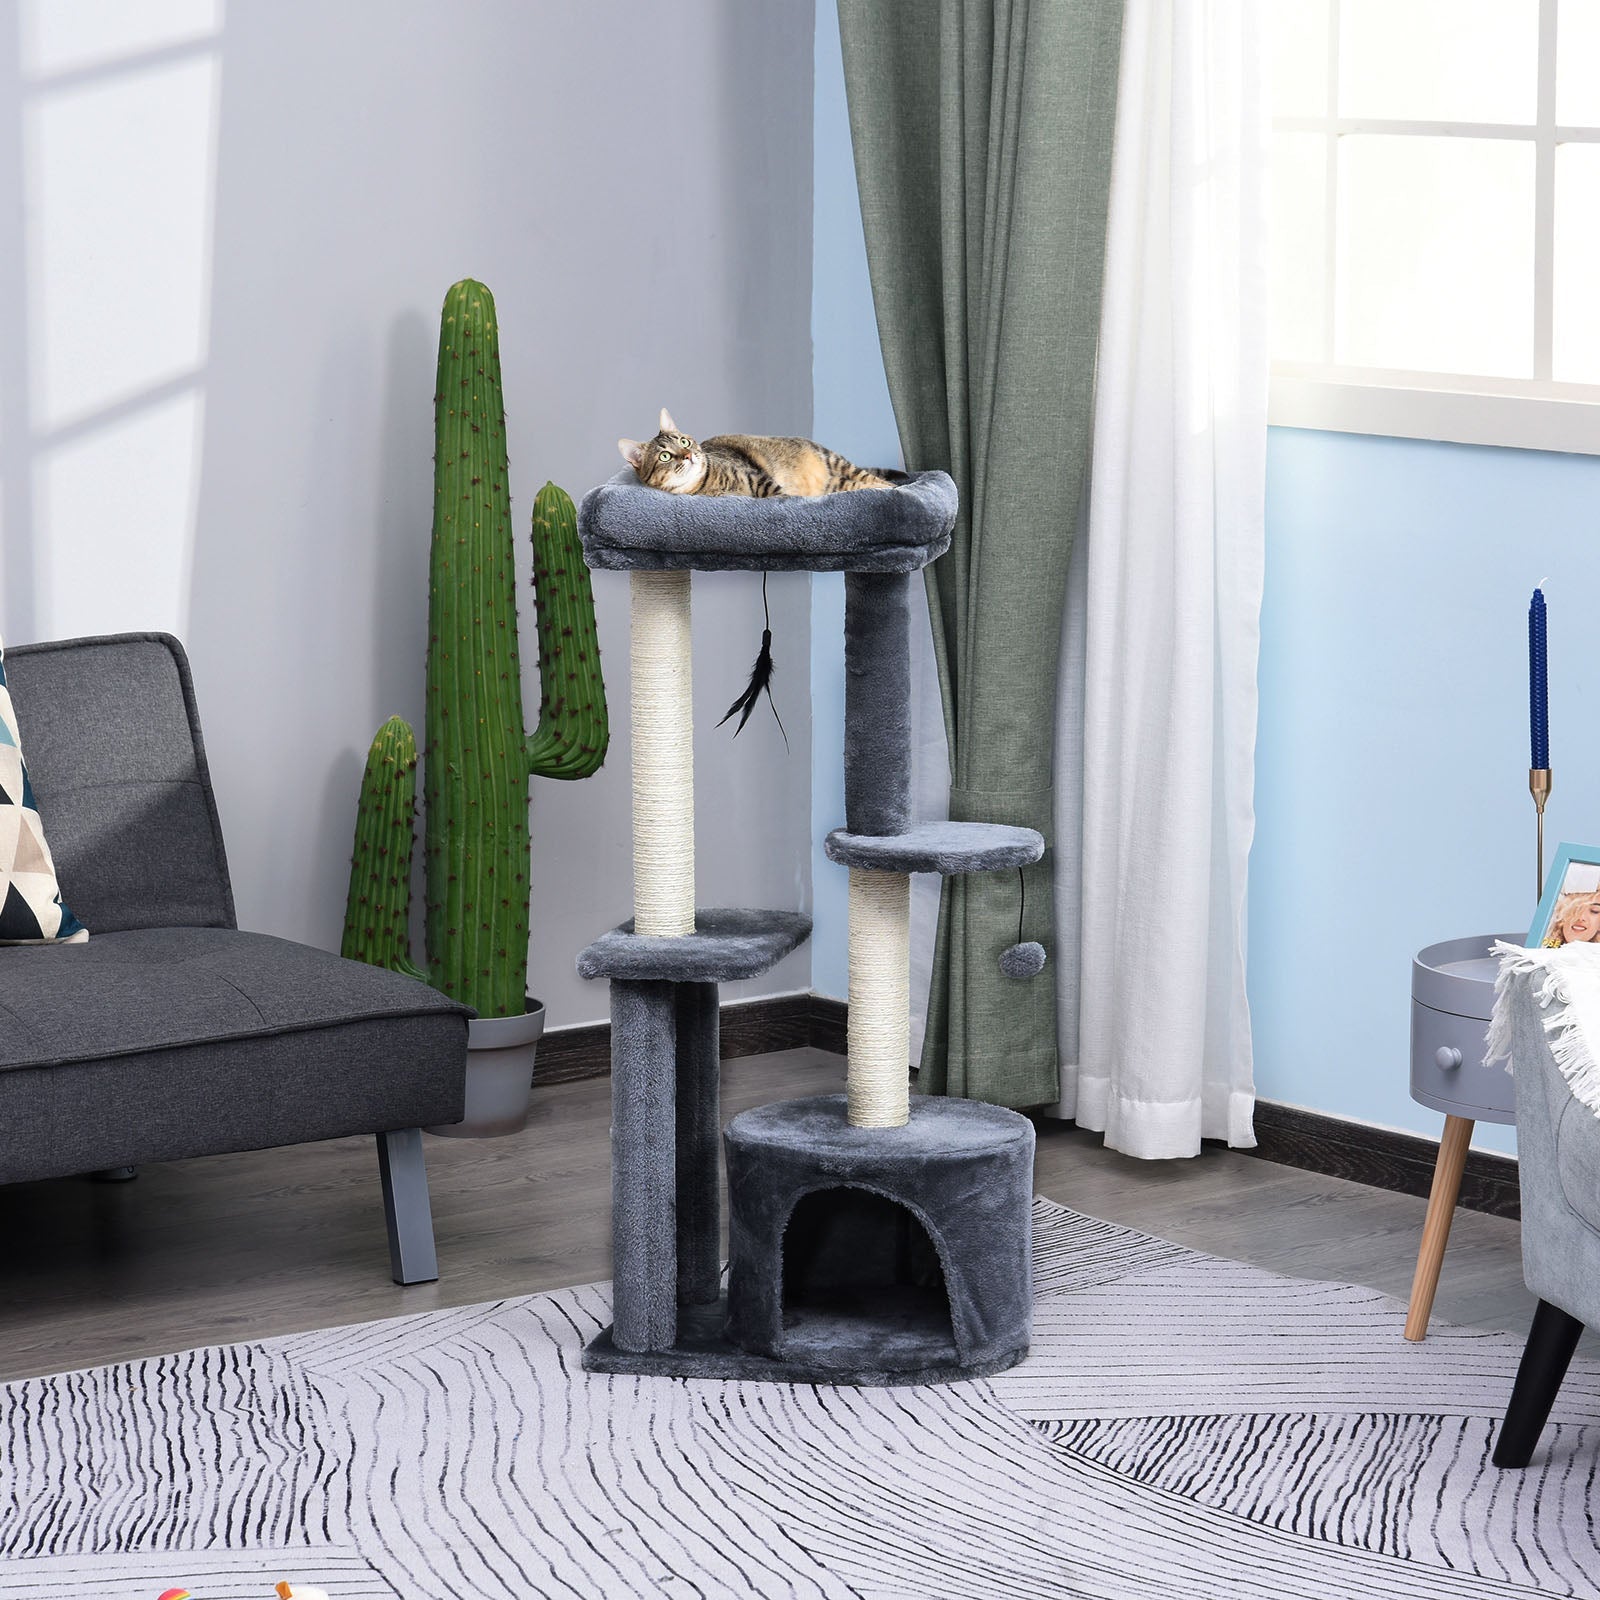 100cm Cat Tree for Indoor Cats, Multi-Activity Cat Tower with Perch House Scratching Post Platform Play Ball Rest Relax, Grey and White-1